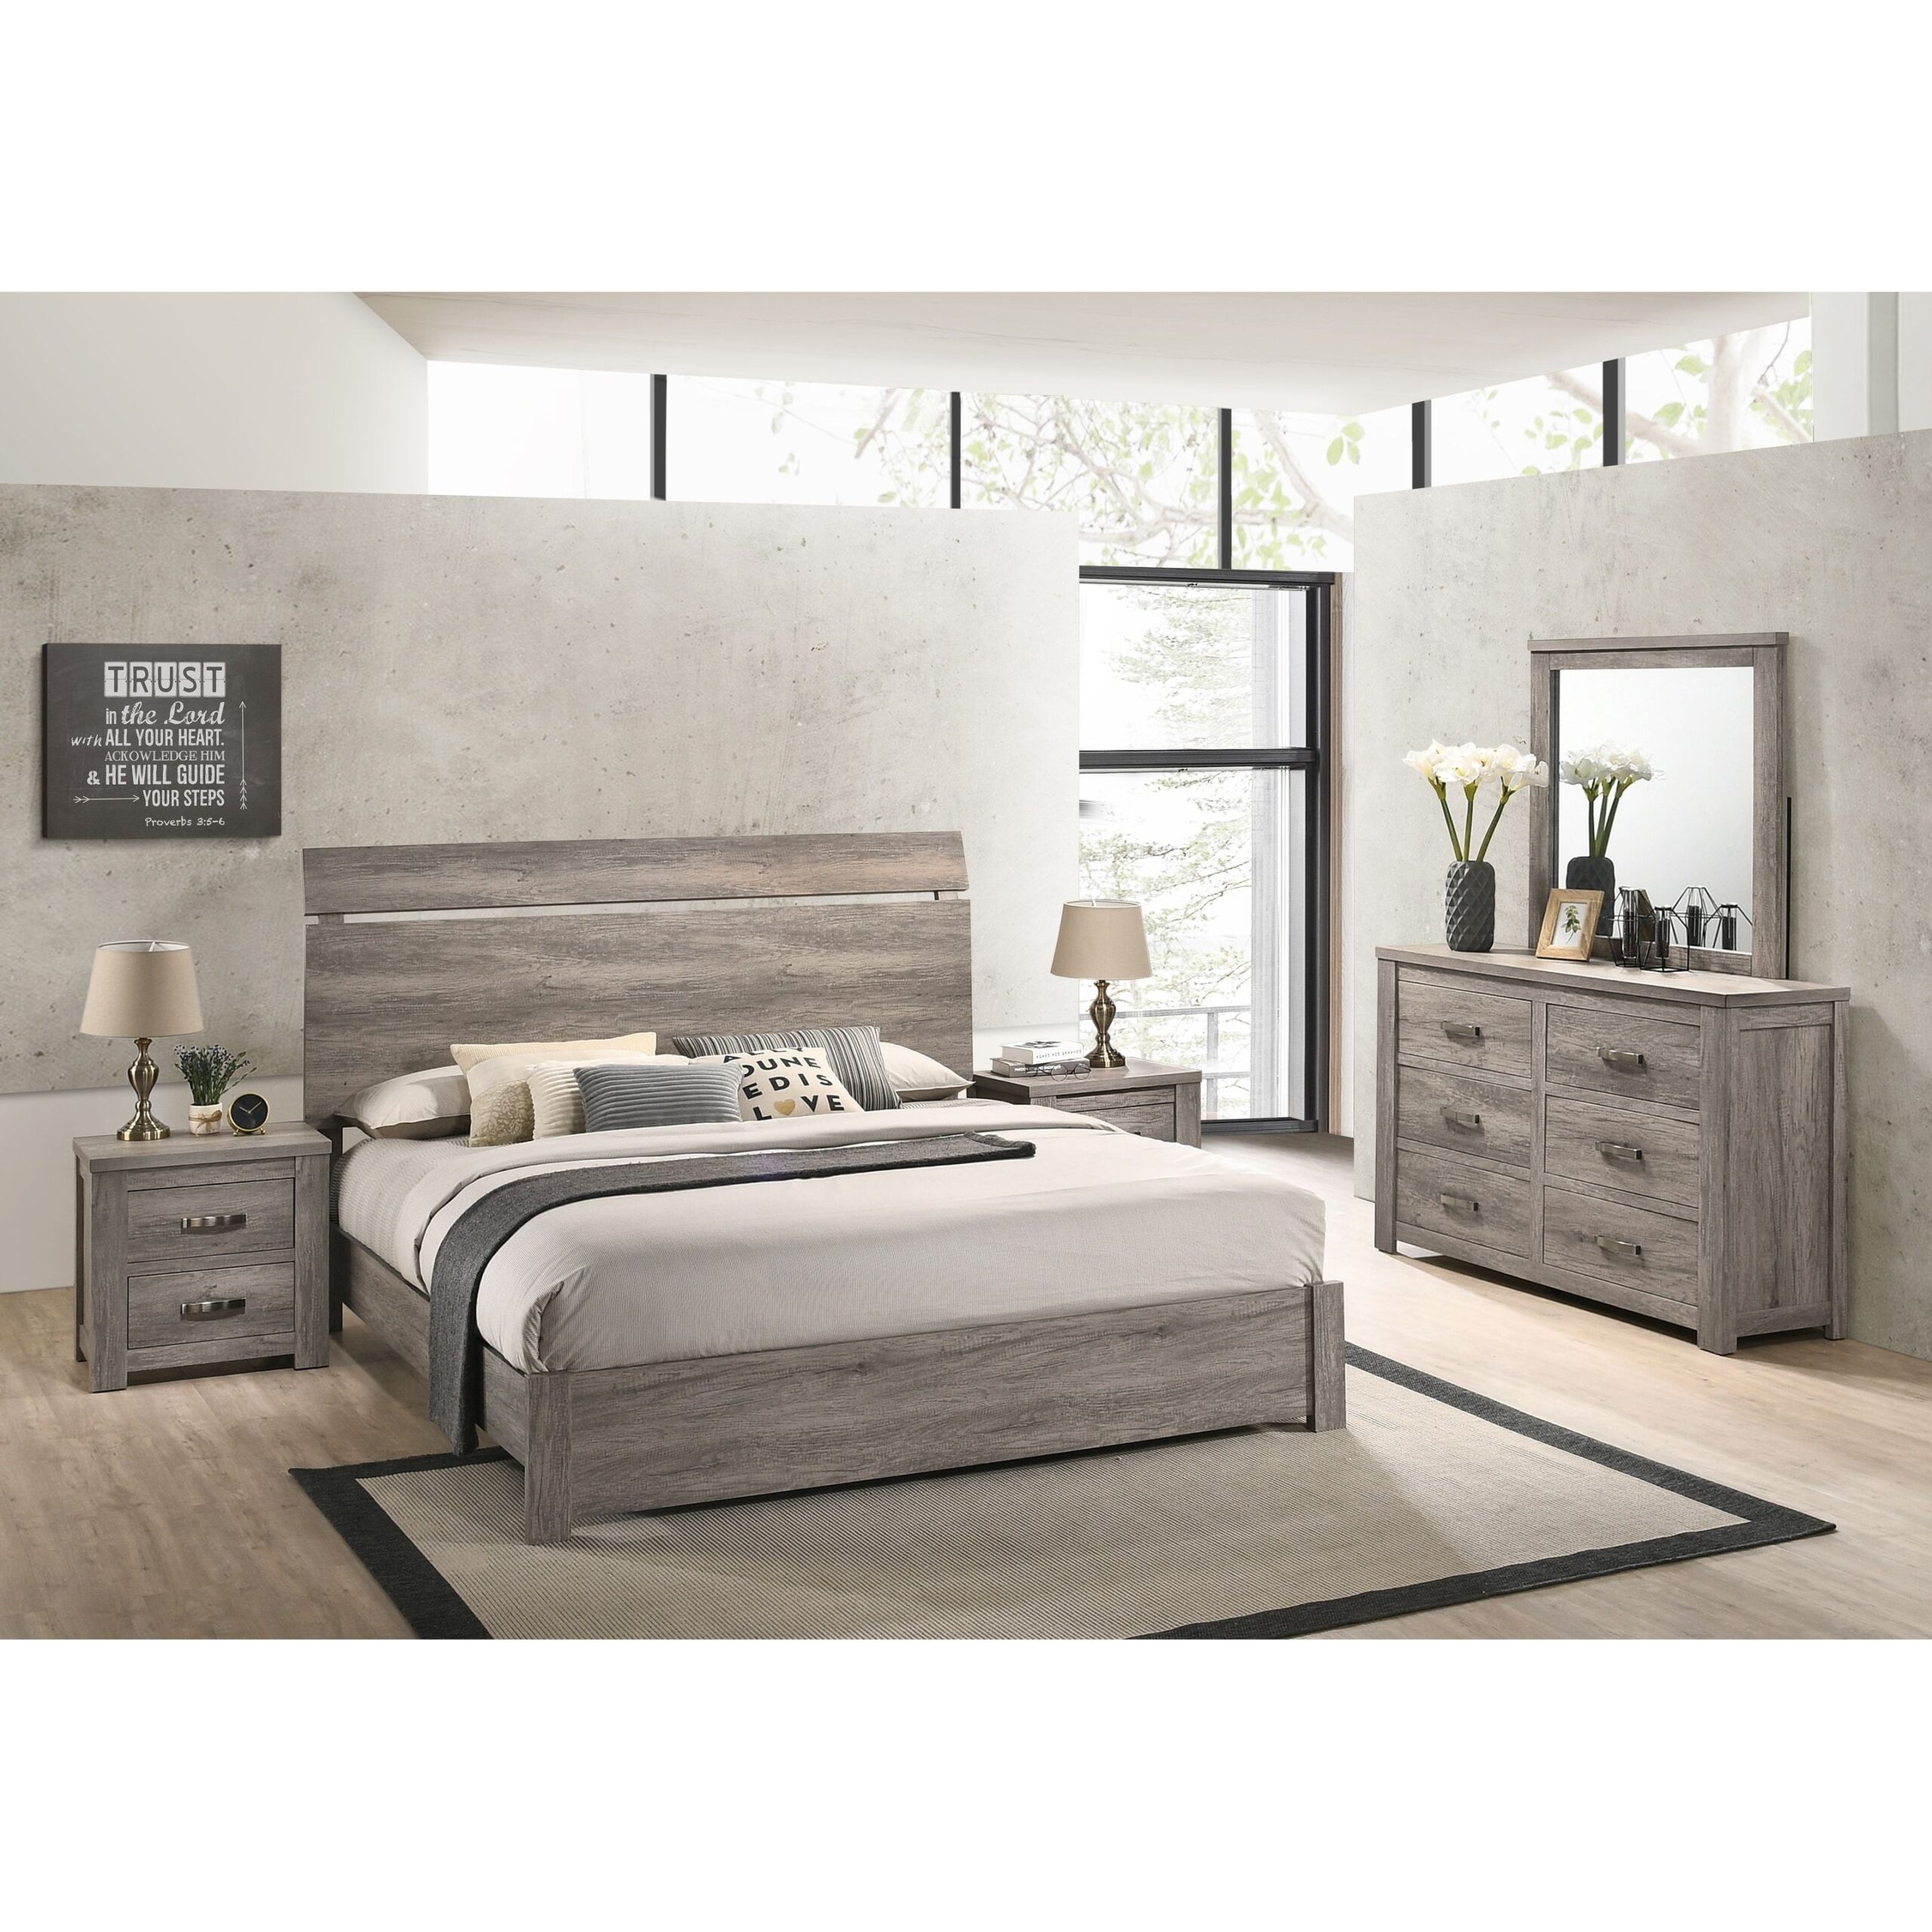 Stylish and Elegant Grey Bedroom Furniture Collection